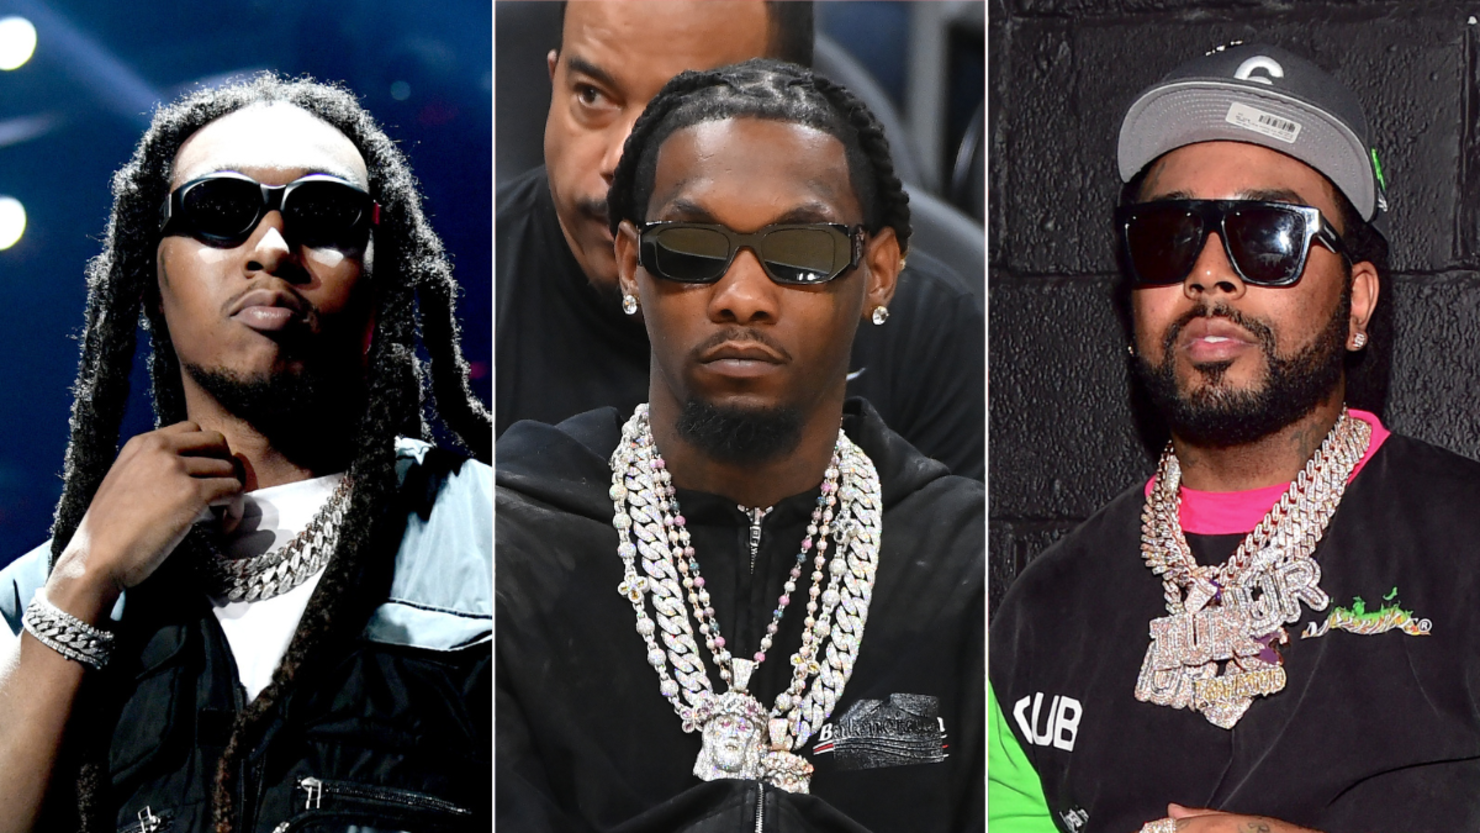 TakeOff, Offset and Icewear Vezzo